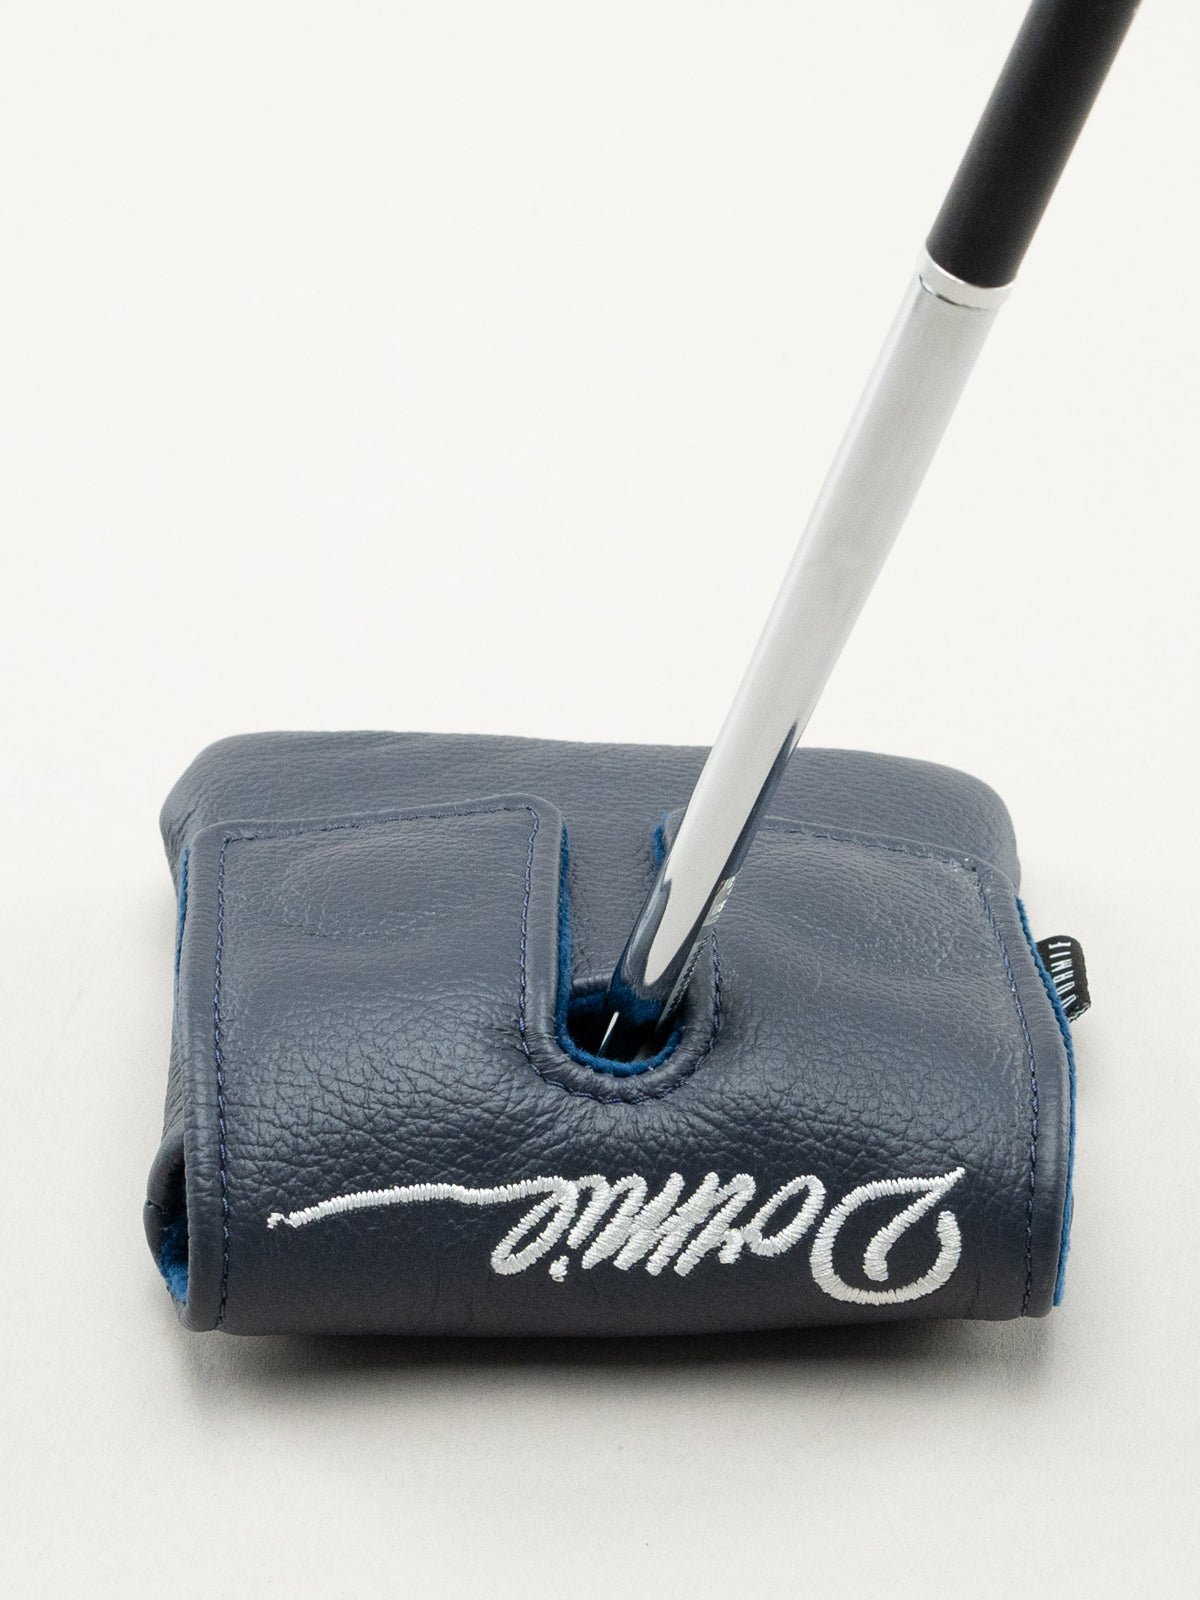 Dormie Ocean Palms Center Shafted Mallet Putter Headcover